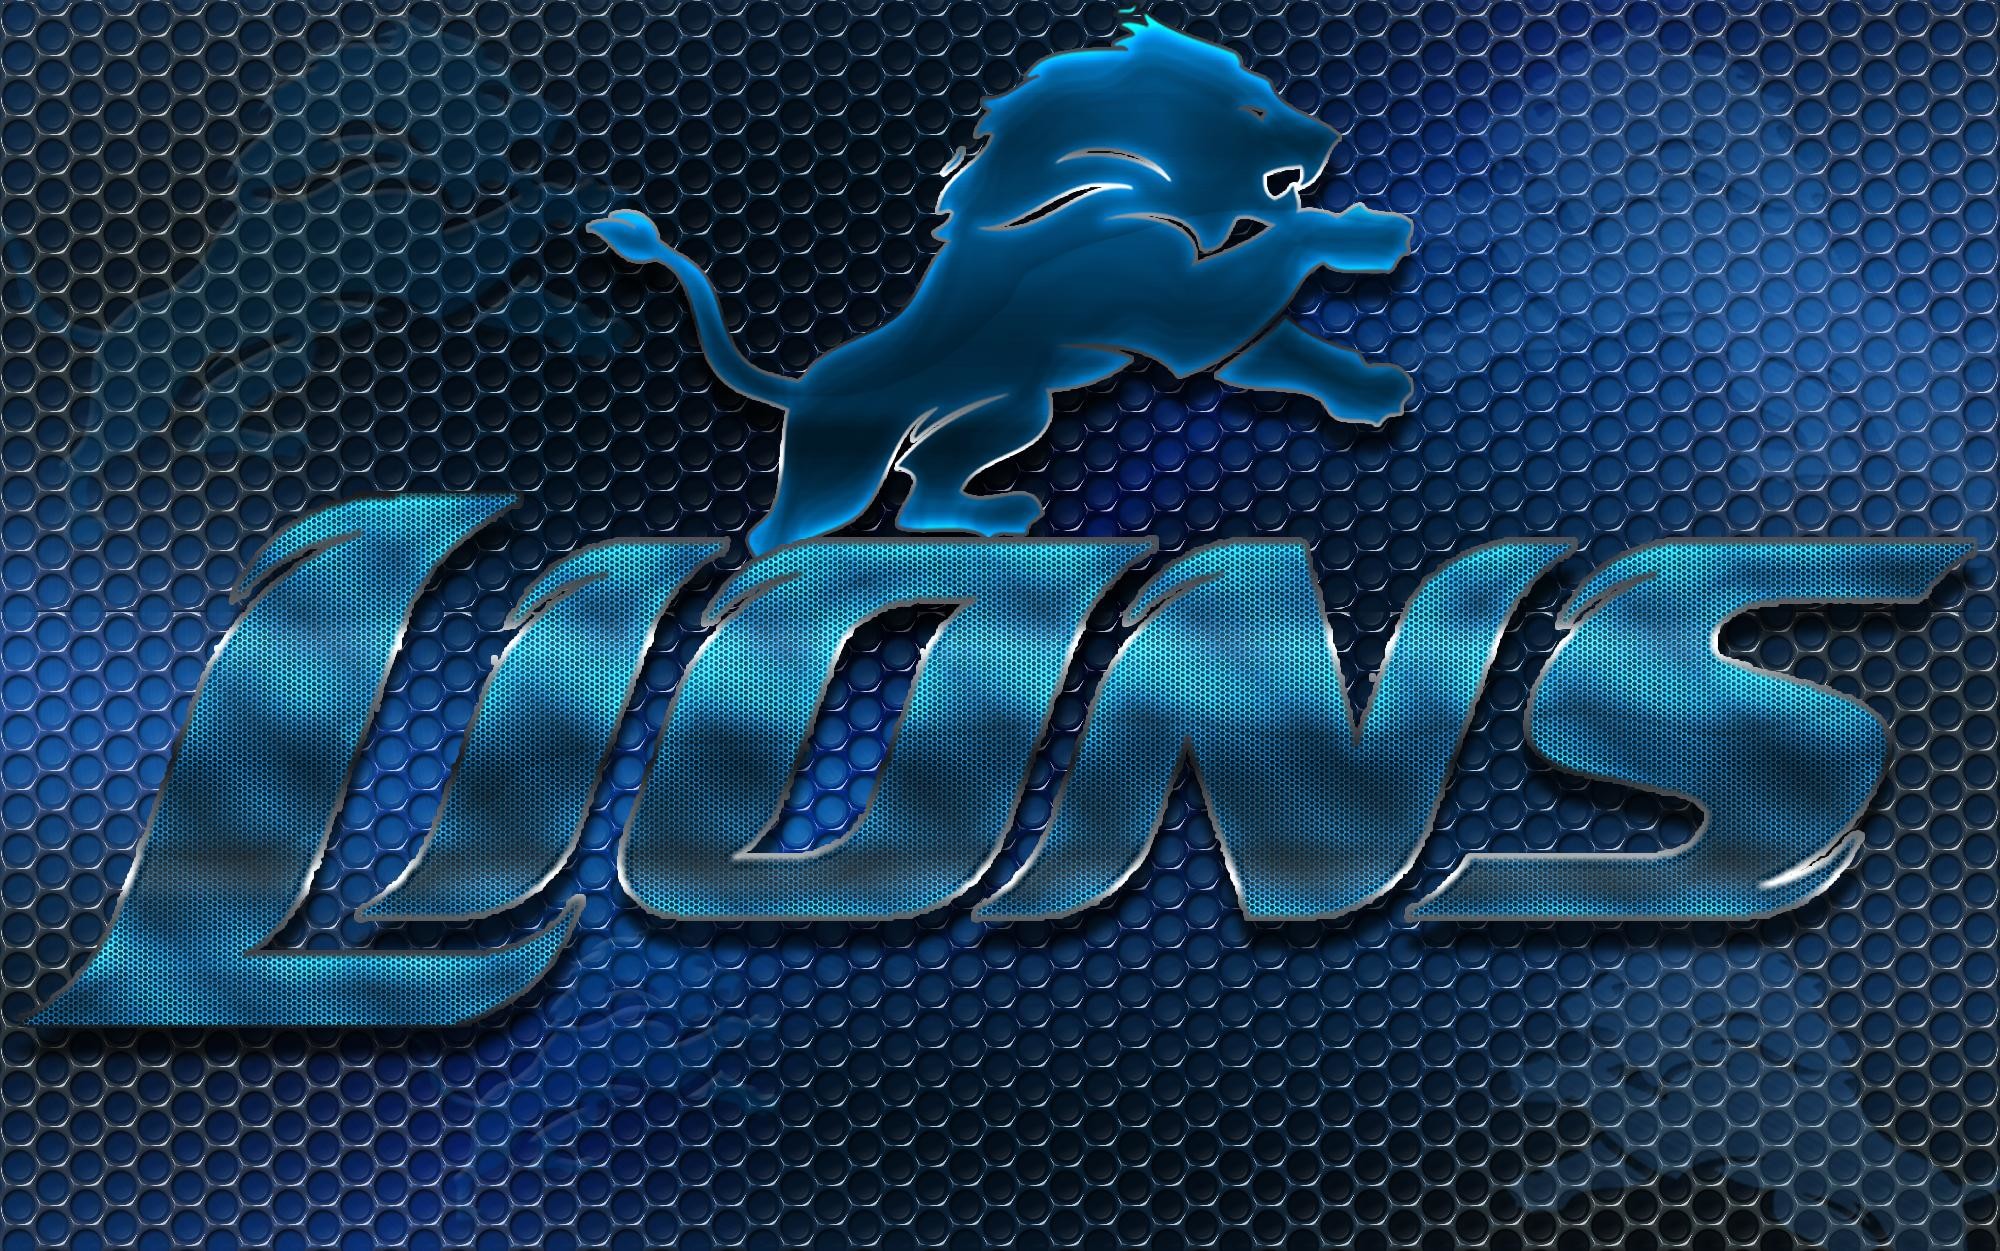 2000x1251  Wallpapers By Wicked Shadows: Detroit Lions 2012 Heavy Metal  Wallpaper